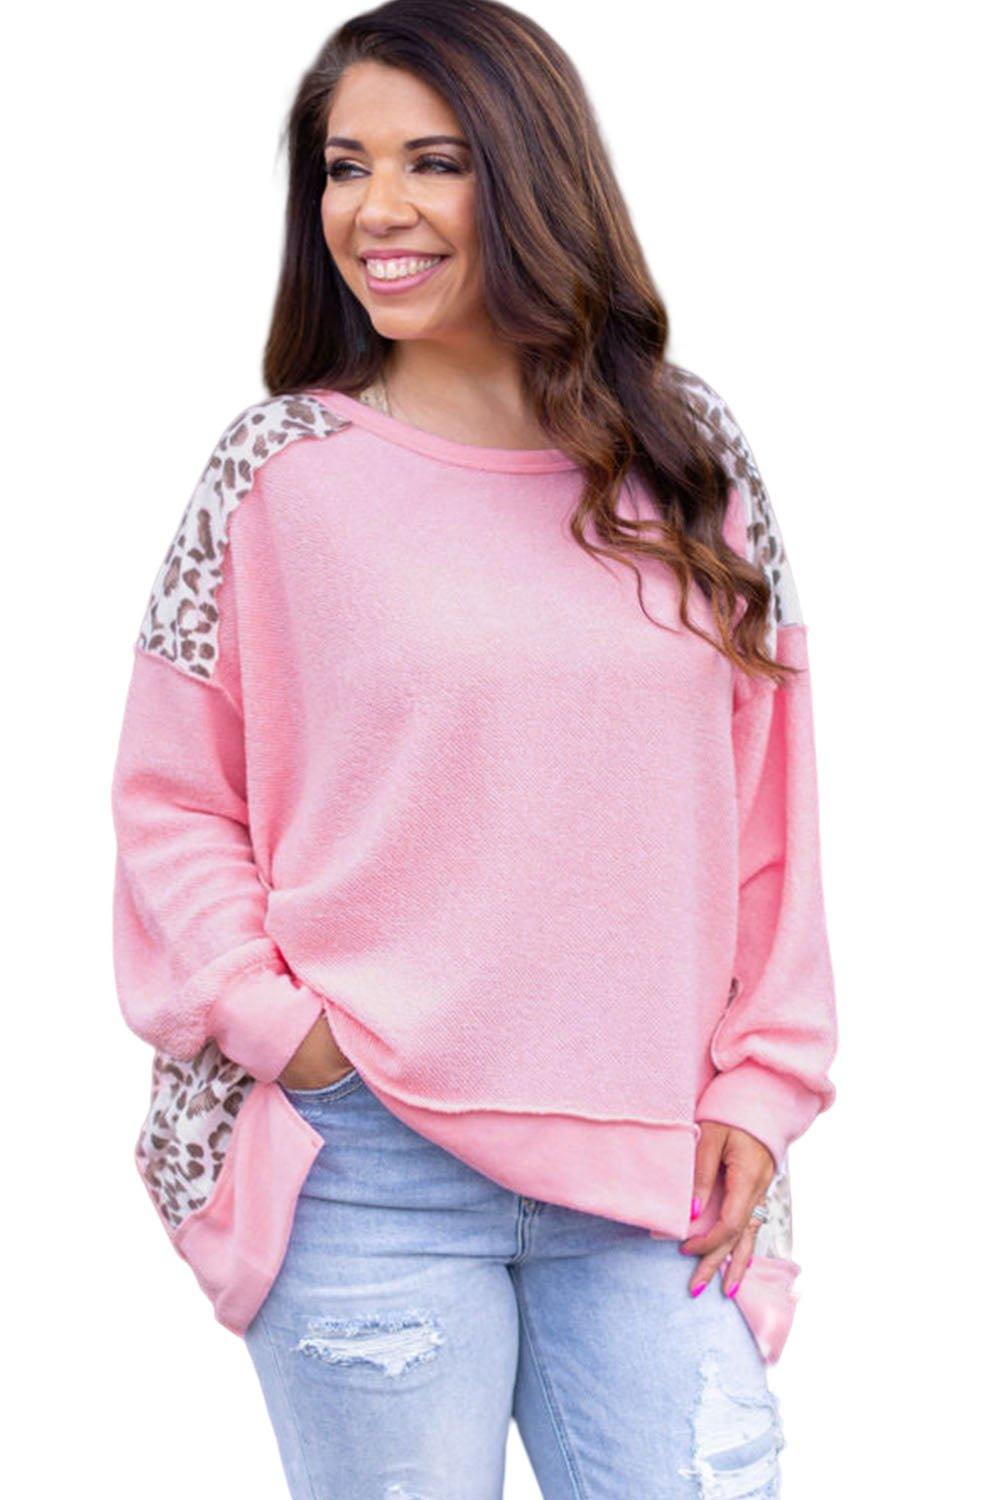 Pink and Leopard Splicing Plus Size Sweater